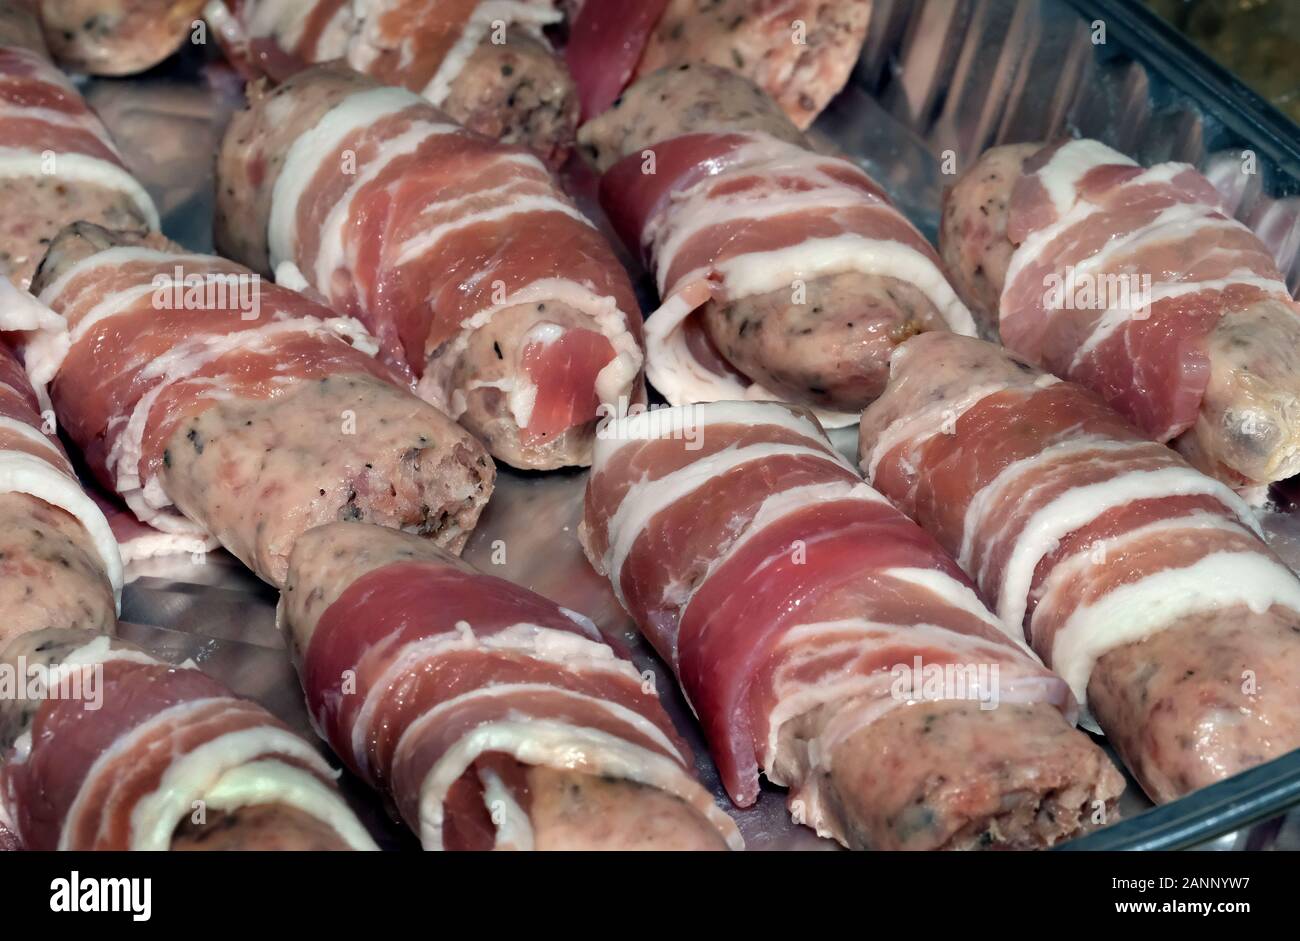 Pigs in blankets ready for the celebration dinner. Pork meat and bacon. Stock Photo